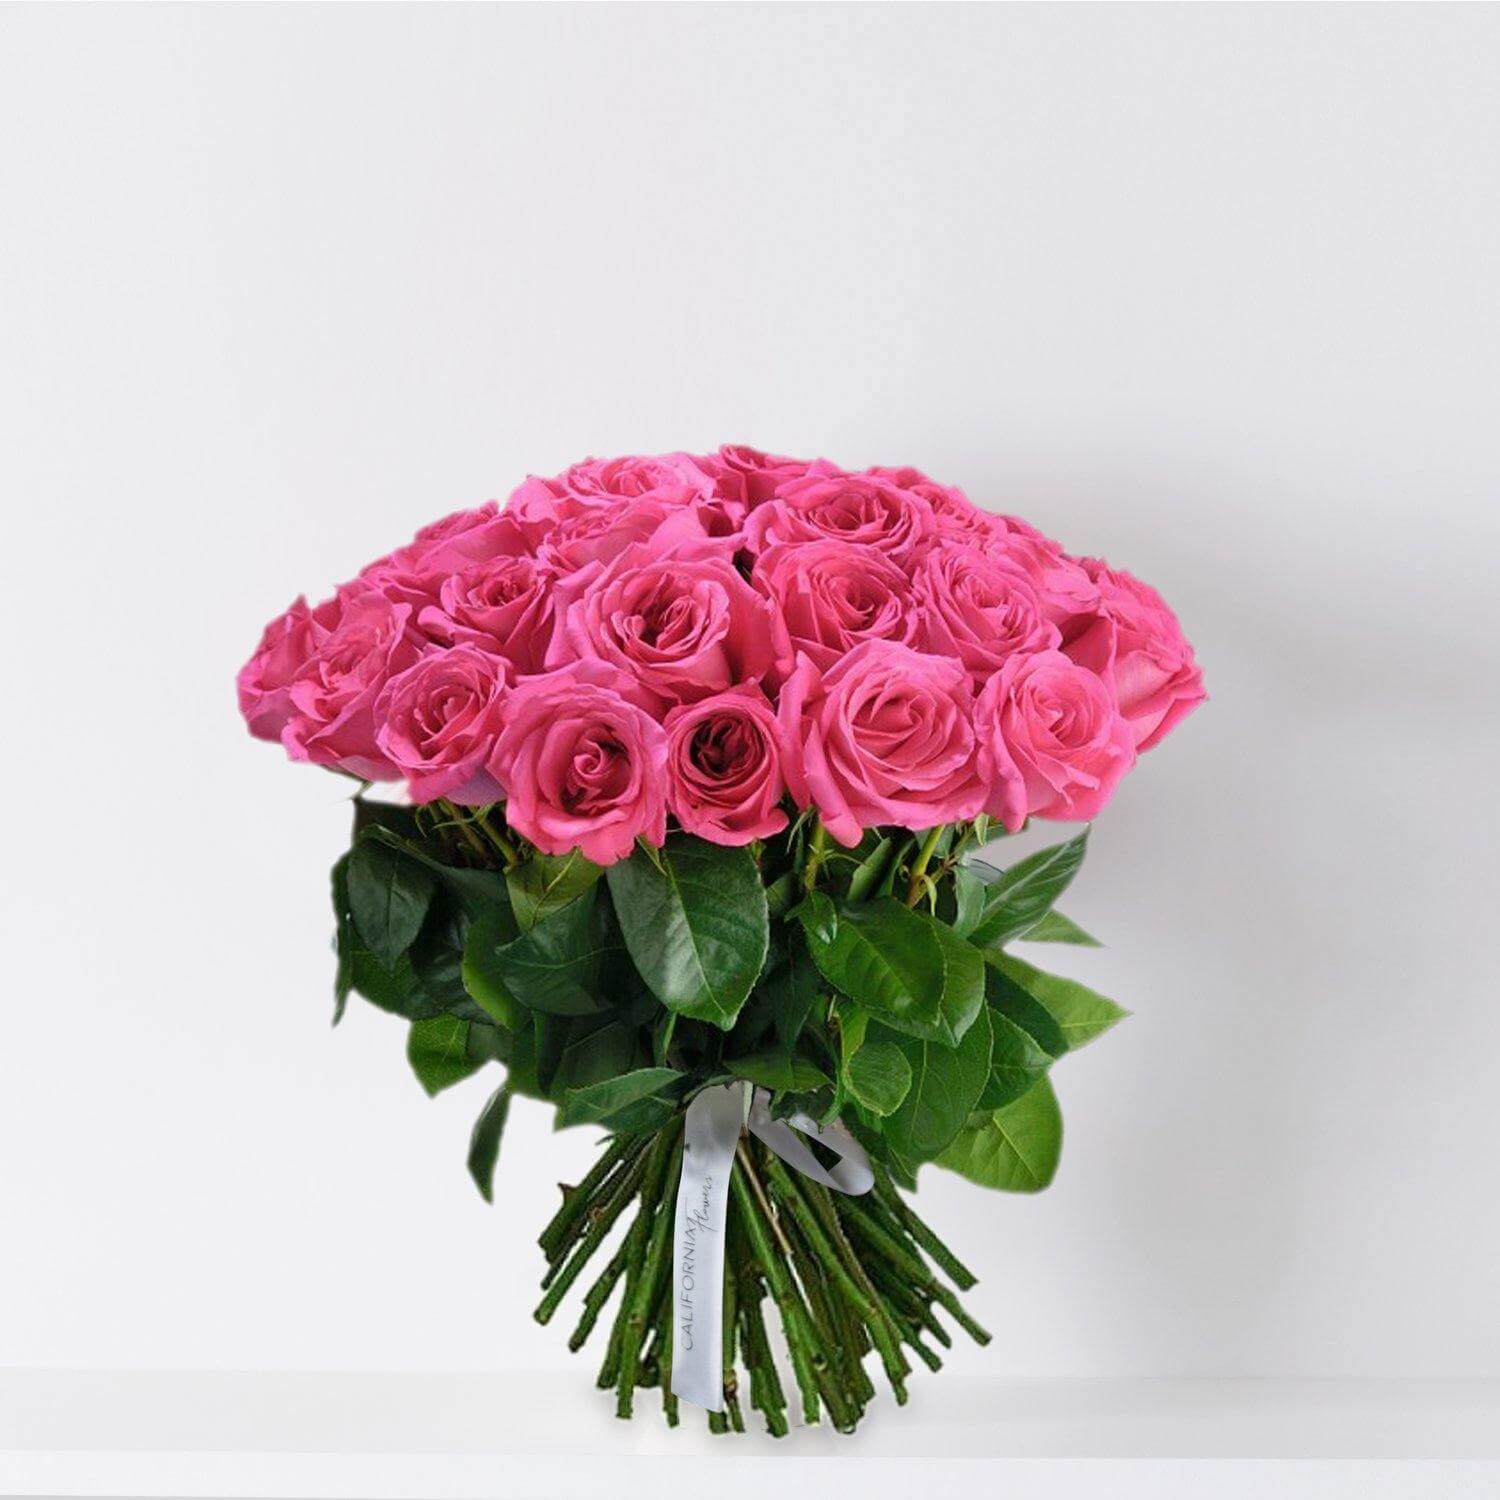 Bouquet of 19 pink roses